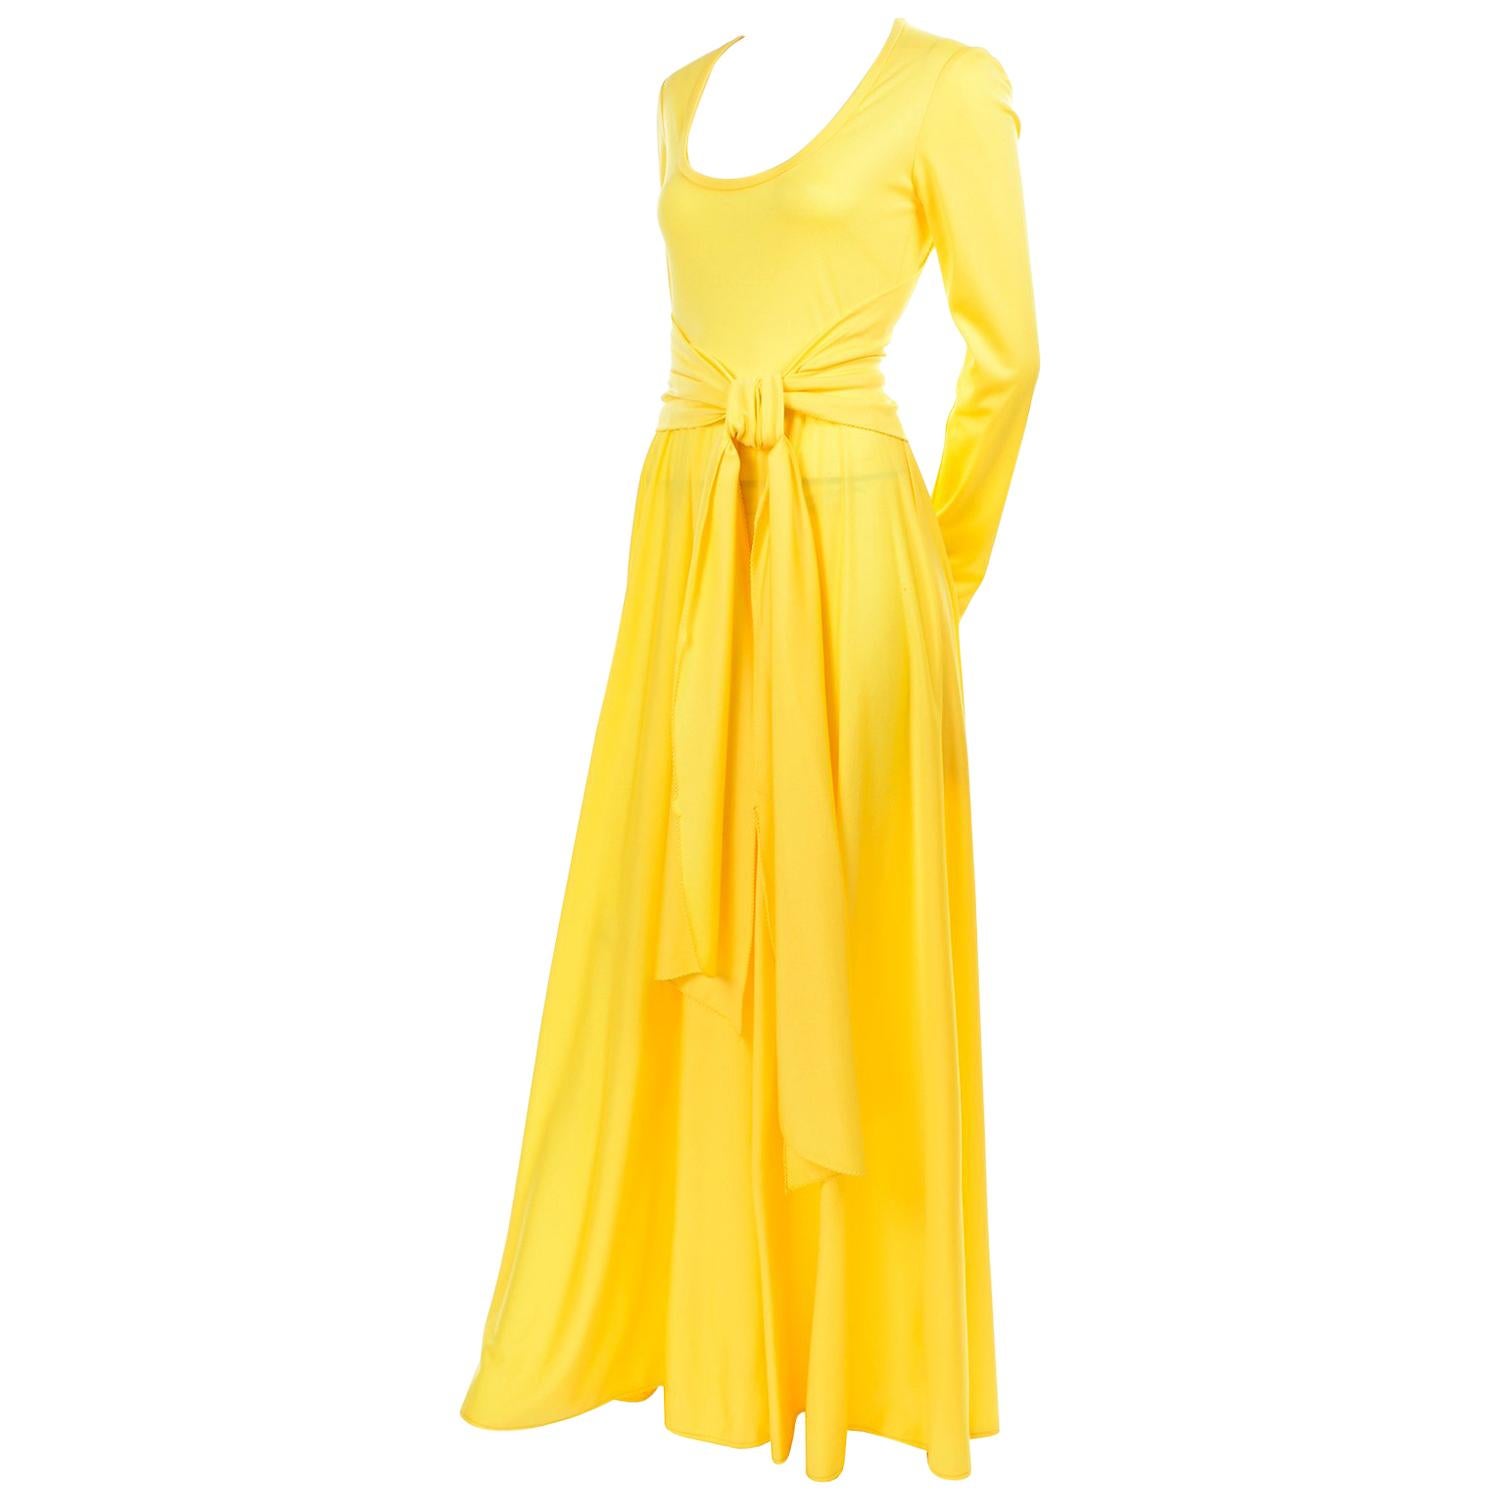 Lillie Rubin Collection 700 Vintage Dress in Yellow Jersey With Sash For Sale